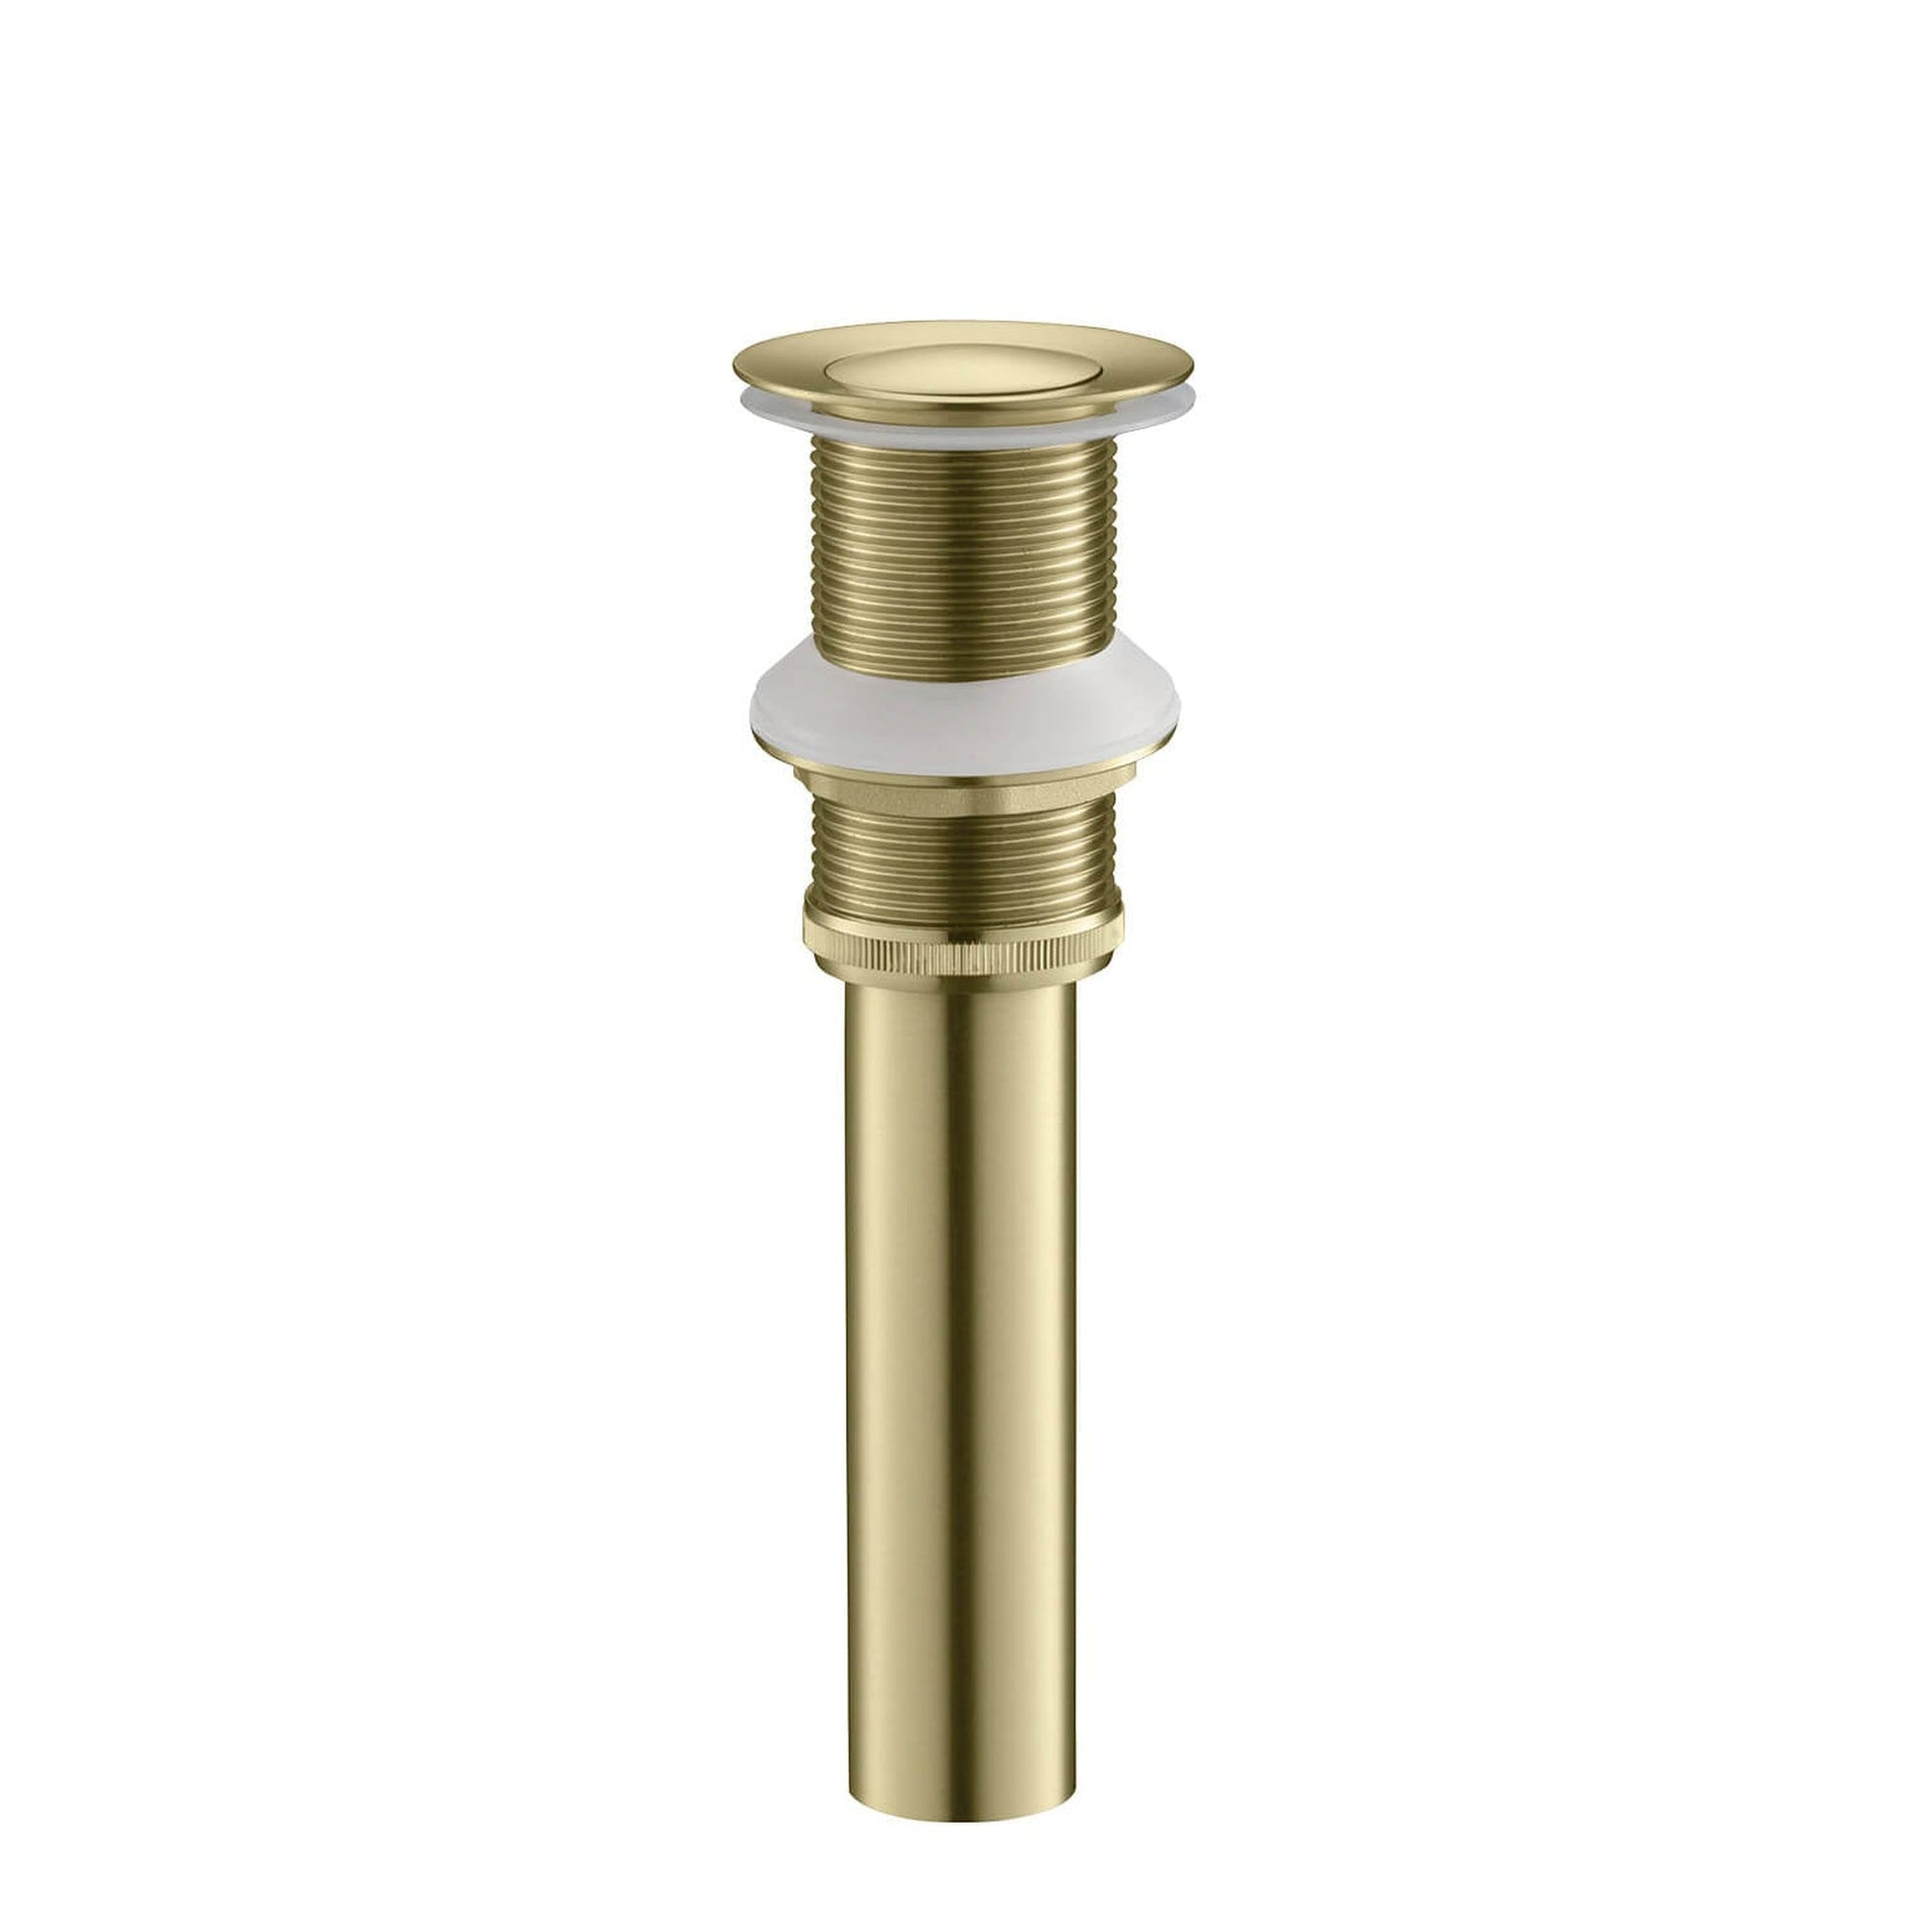 KIBI Blaze-T Single Handle Brushed Gold Solid Brass Bathroom Vessel Sink Faucet With Pop-Up Drain Stopper Small Cover Without Overflow